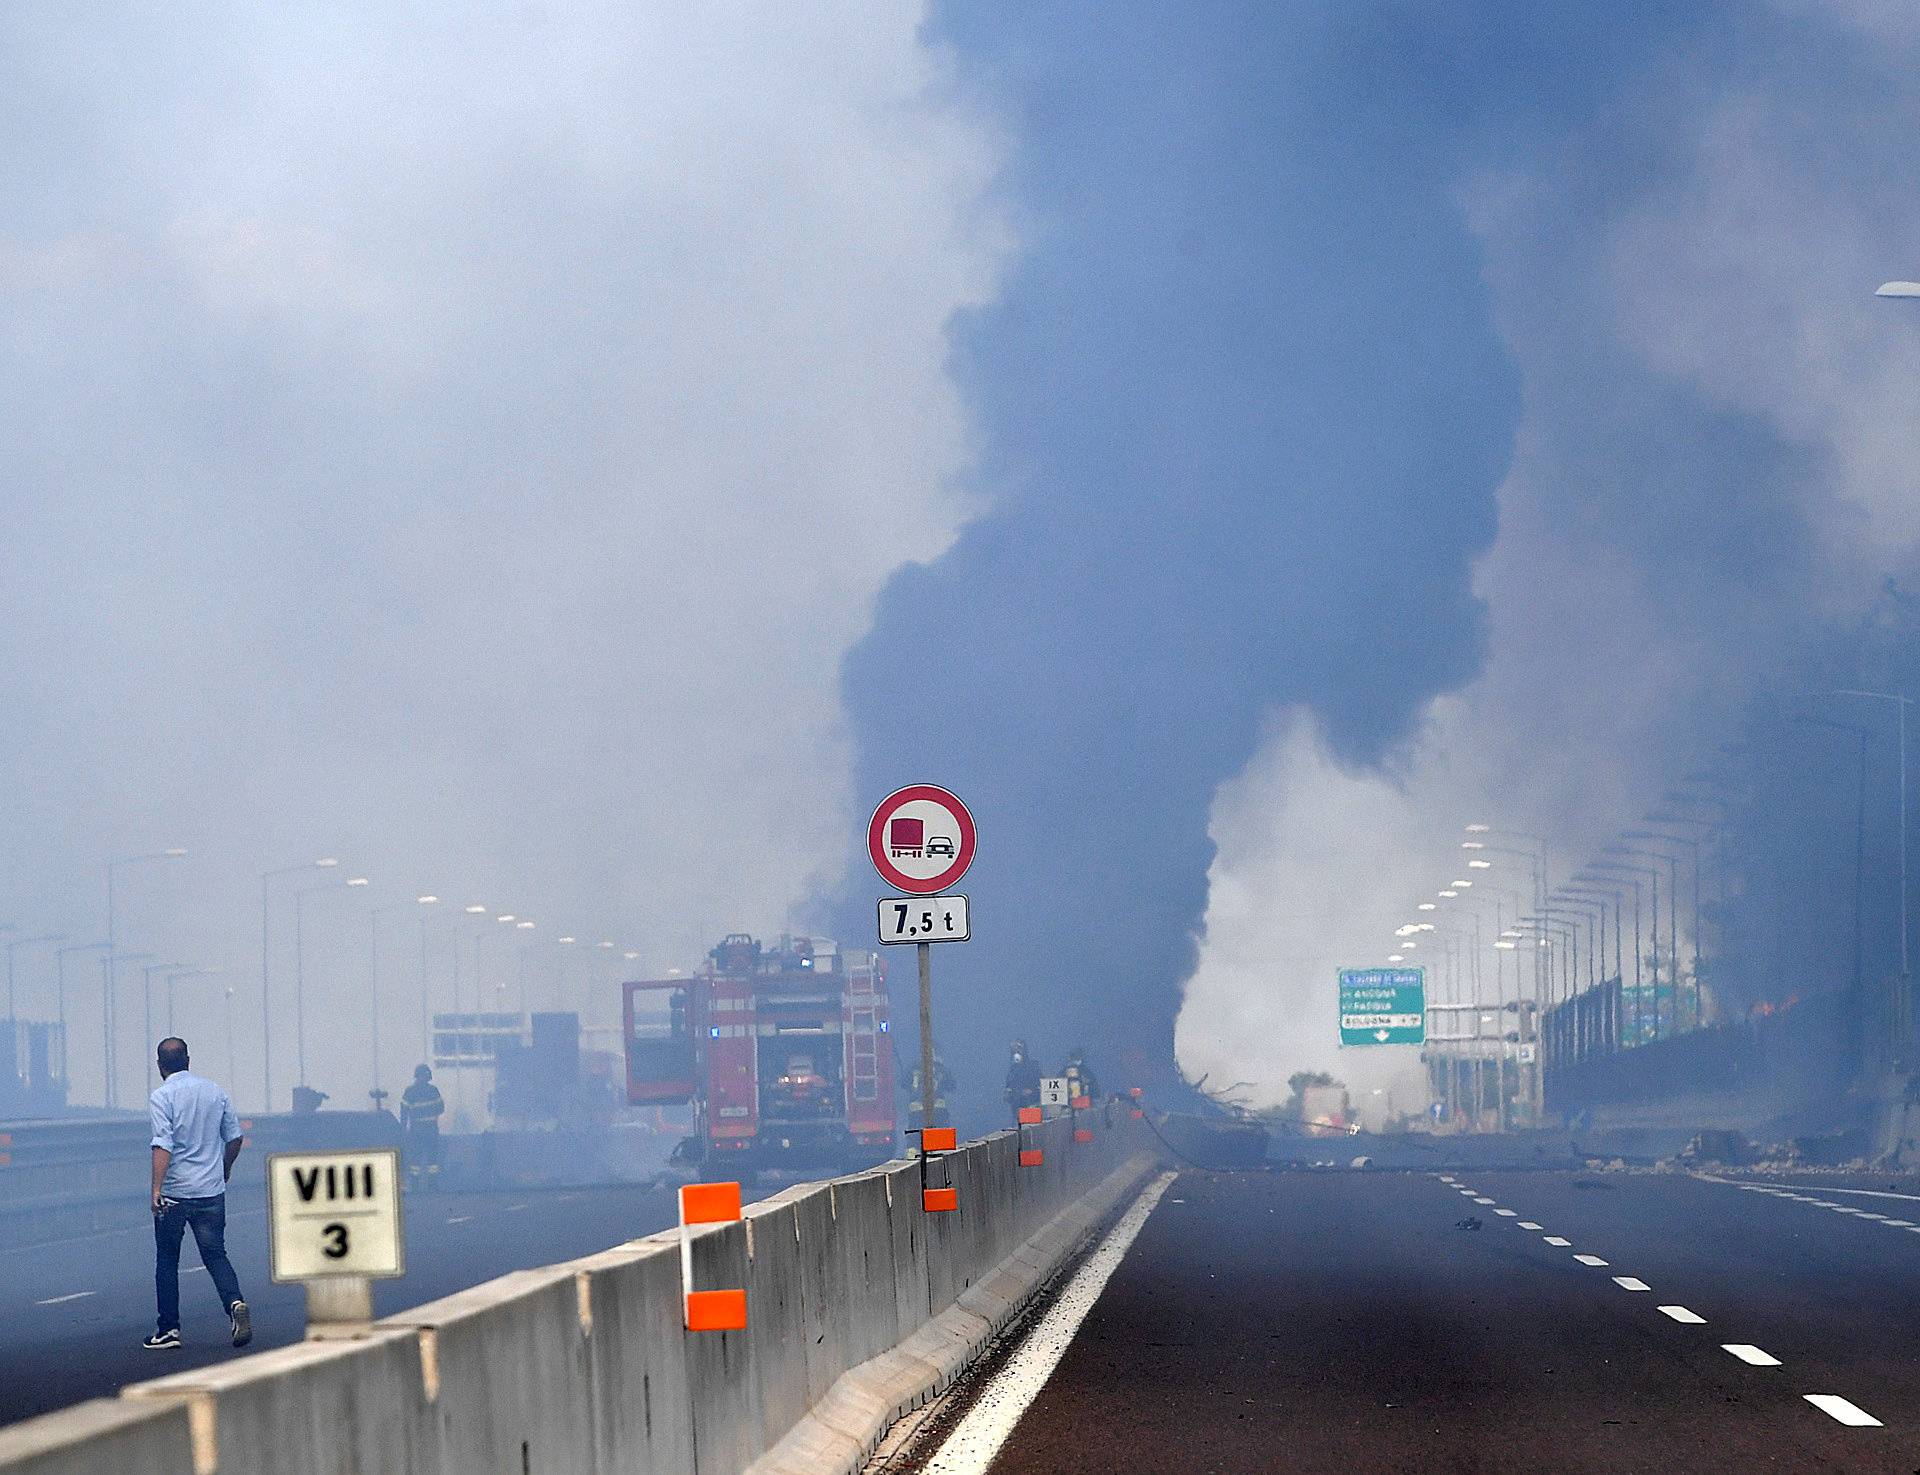 Firefighters work on the motorway after an accident caused a large explosion and fire at Borgo Panigale, on the outskirts of Bologna